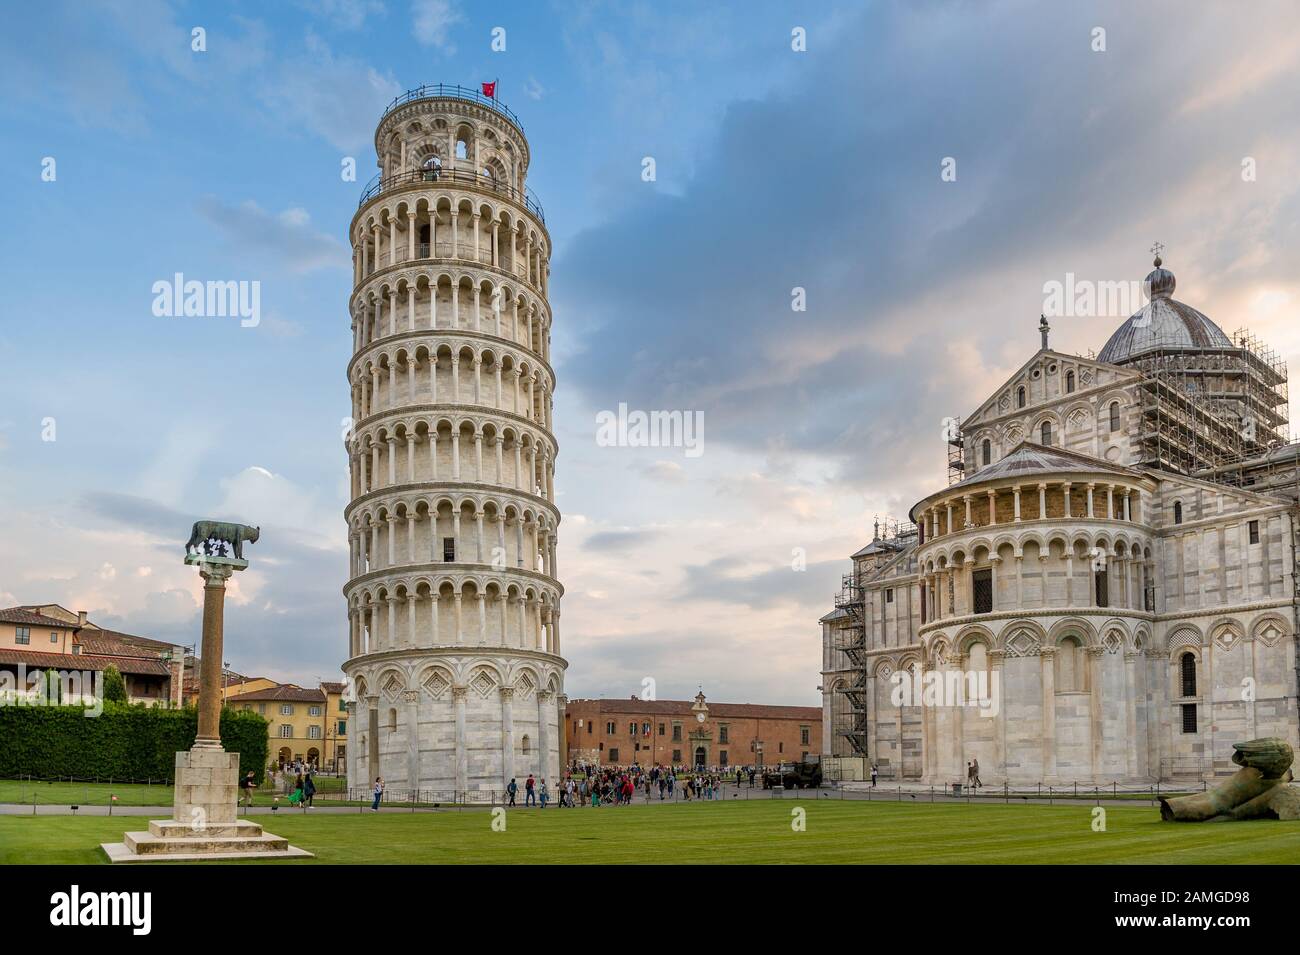 Pisa tower and cathedral at evening light. Piazza del Duomo, Pisa, Italy. Stock Photo